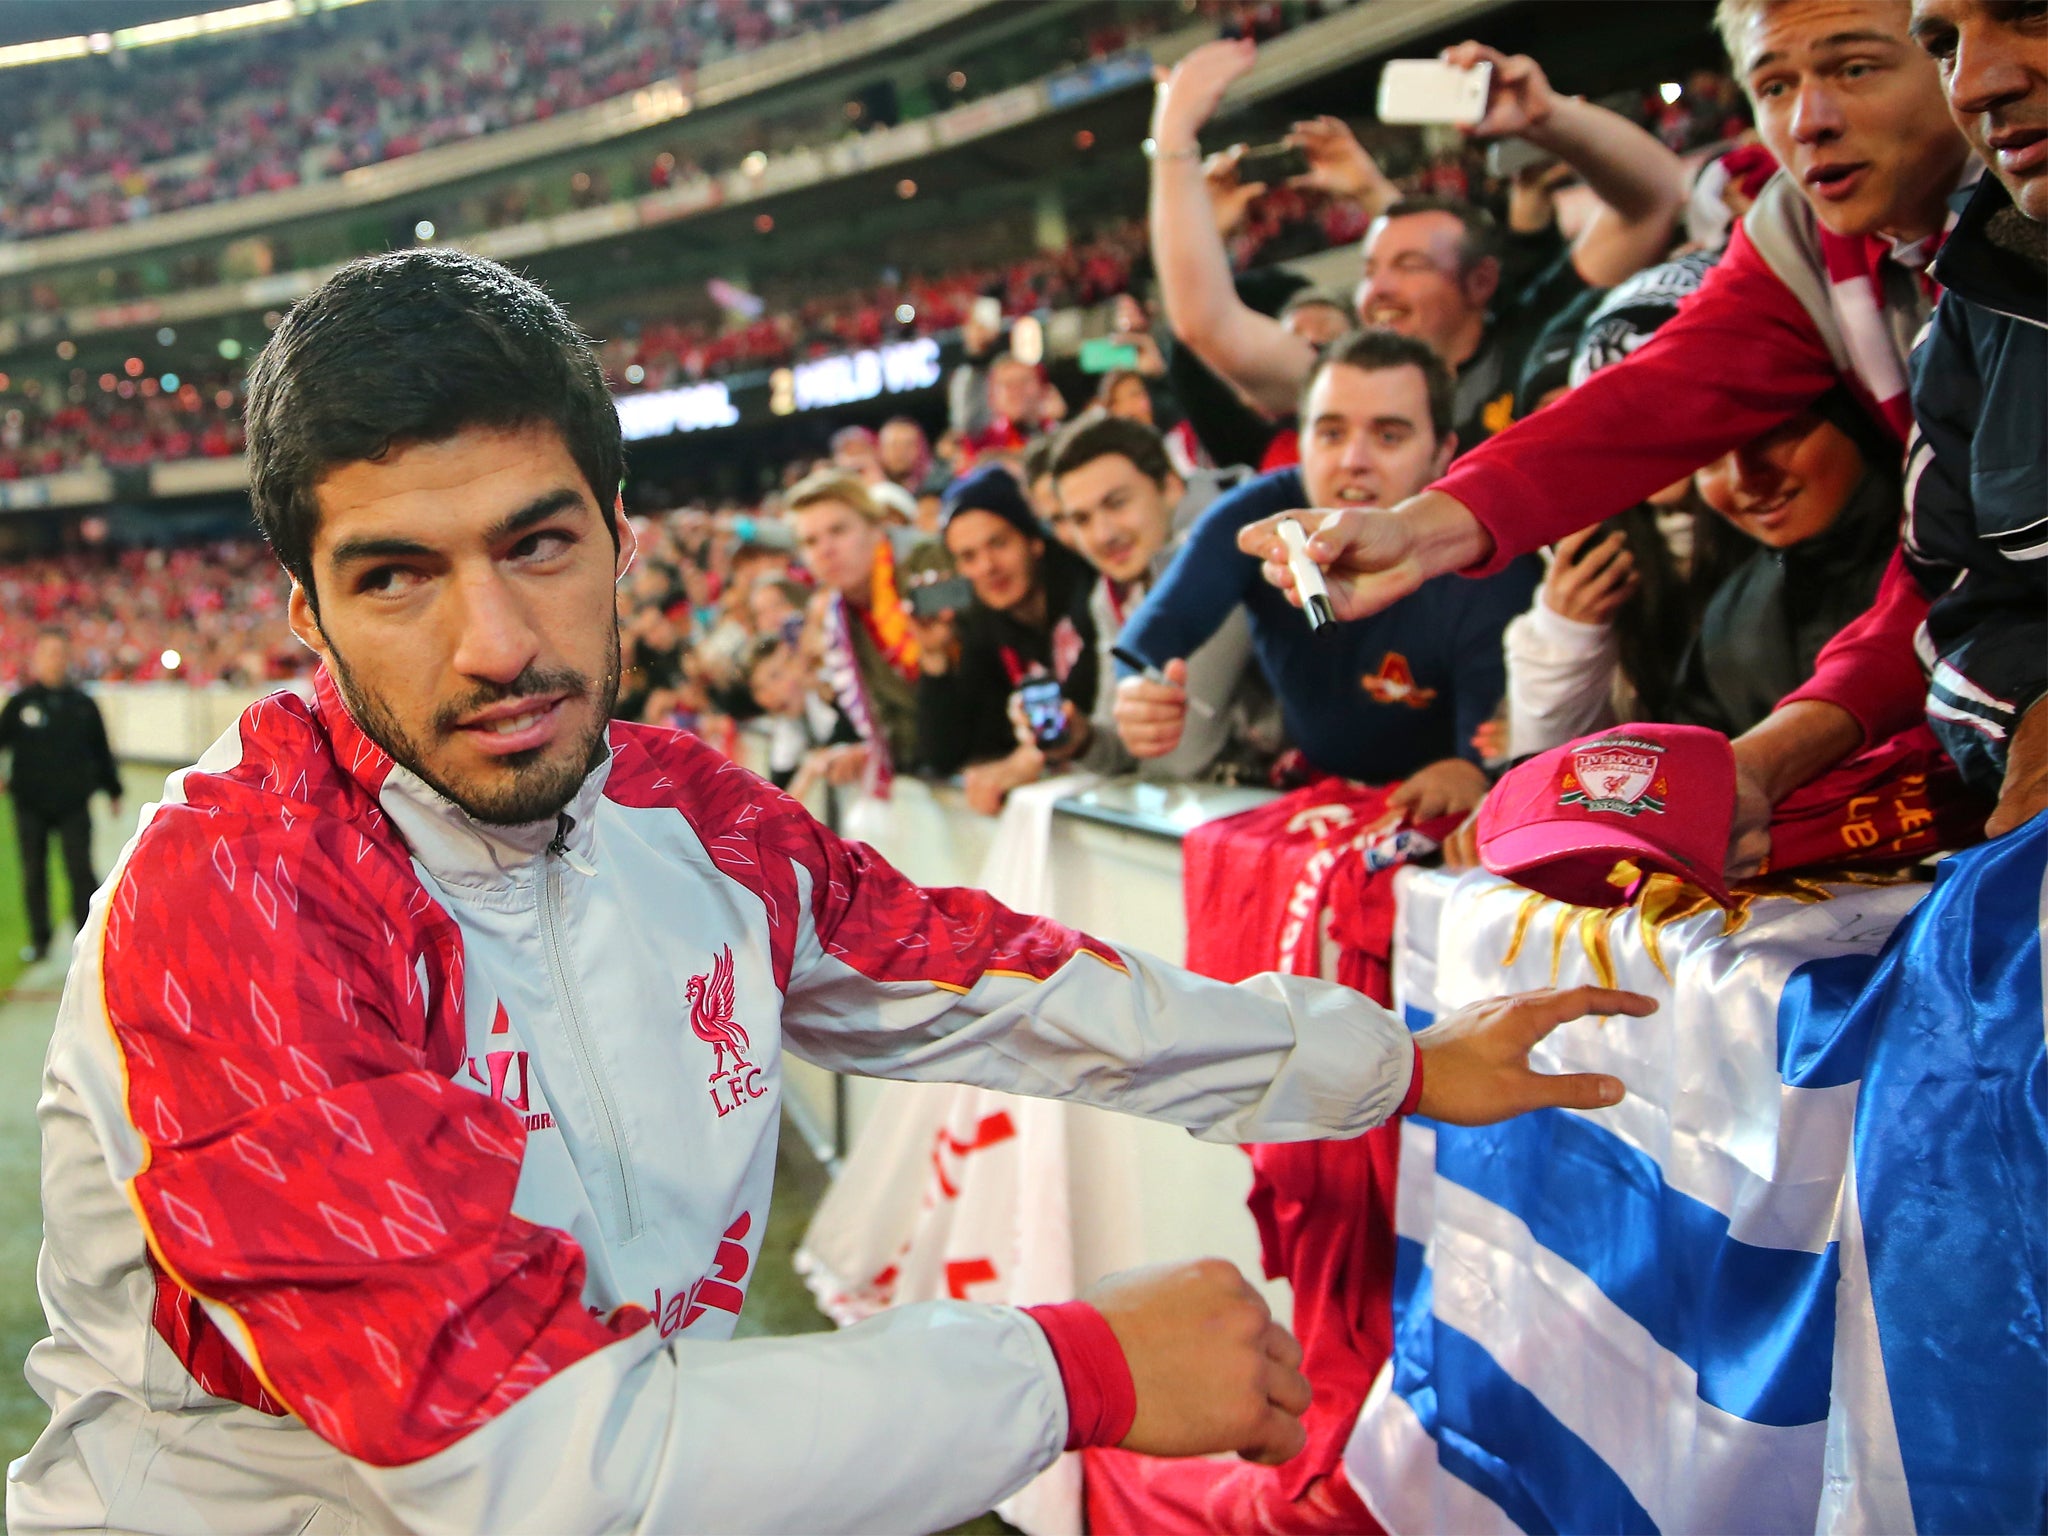 Luis Suarez meets fans after the match between Melbourne Victory and Liverpool in Australia